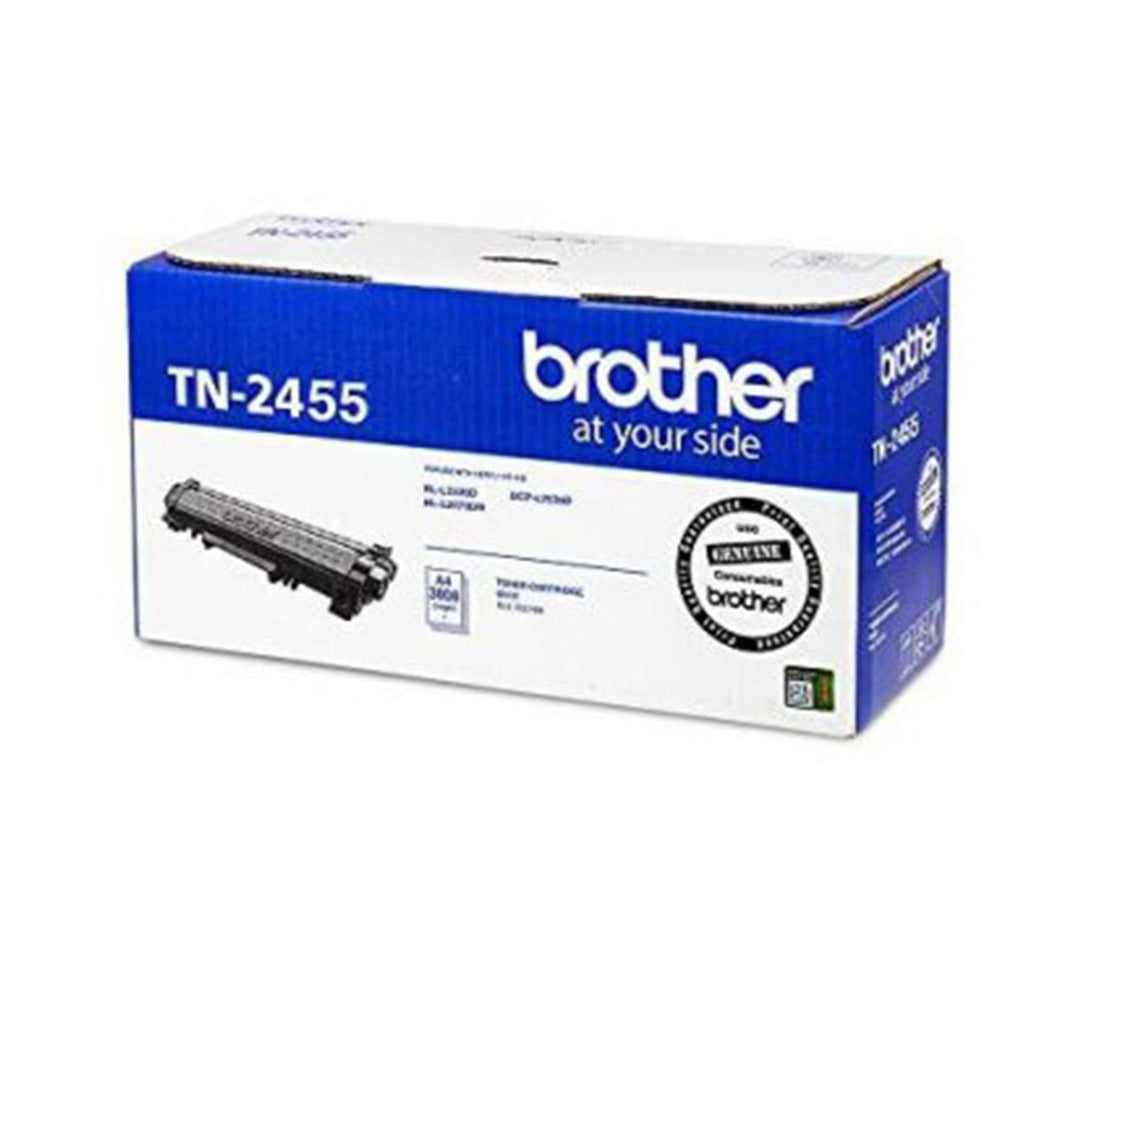 Brother   Toner Cartridge  for DCP-L2550DW HL-2335D, L2370DN and DCP-L2535D